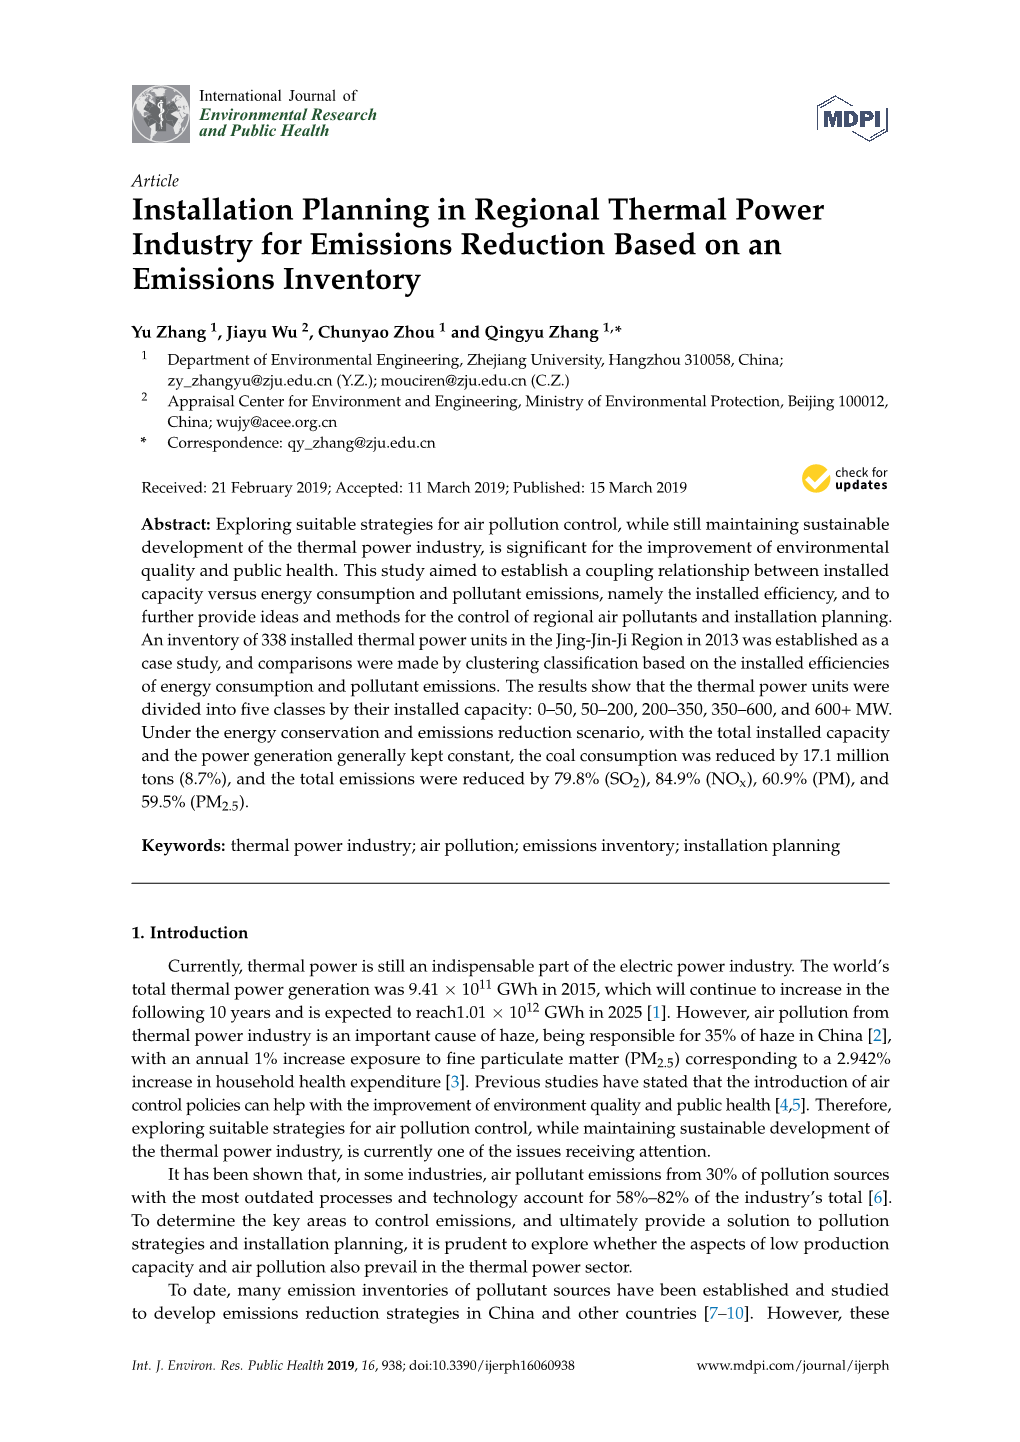 Installation Planning in Regional Thermal Power Industry for Emissions Reduction Based on an Emissions Inventory